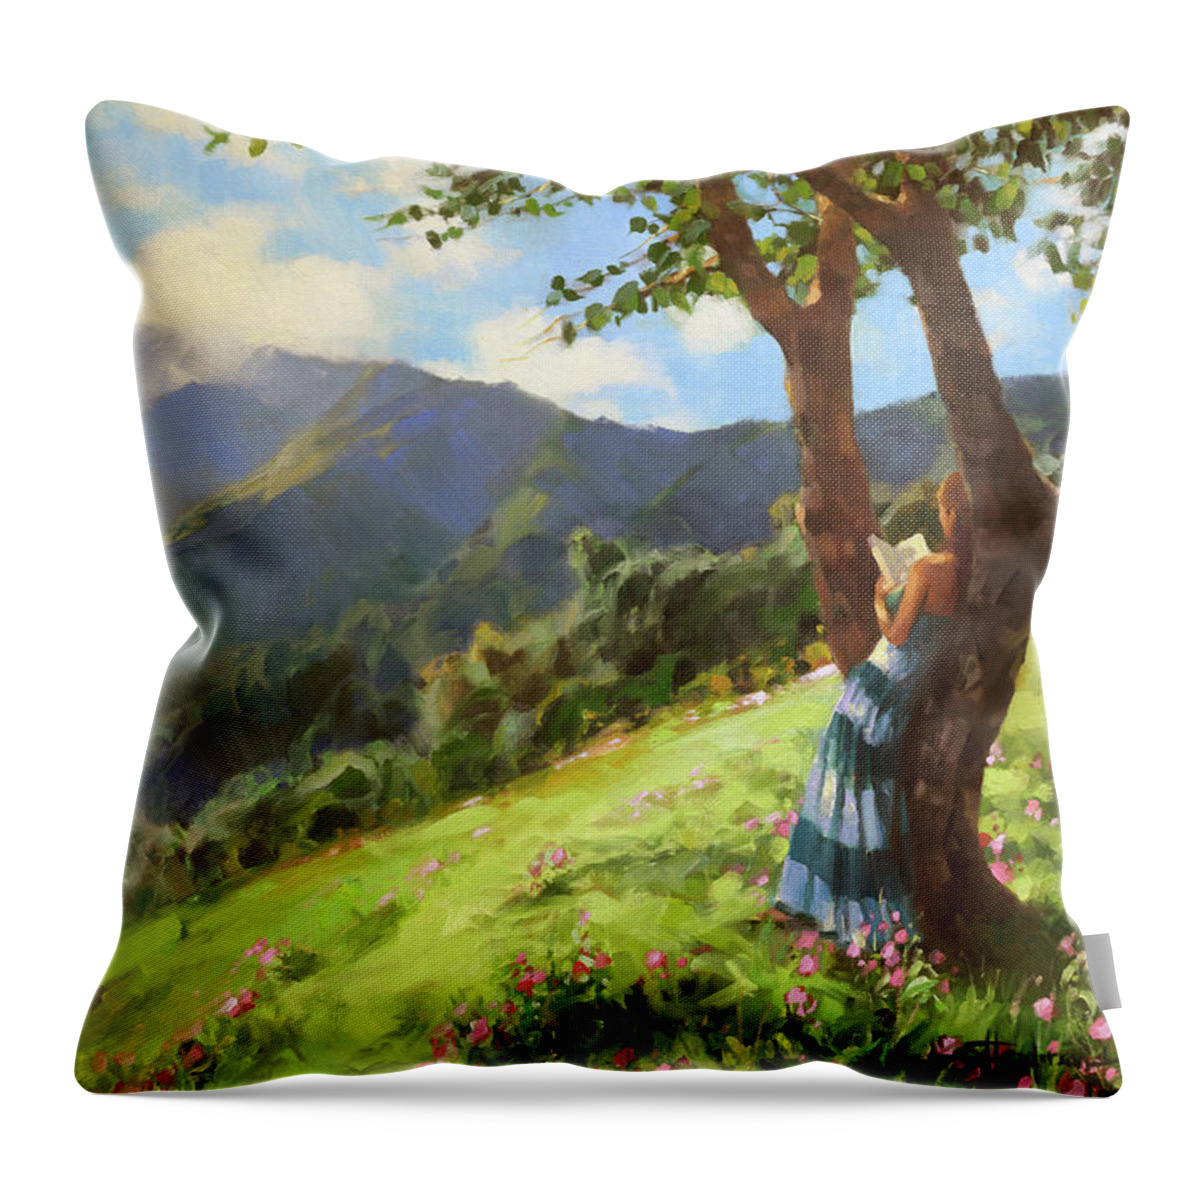 Reading Throw Pillow featuring the painting A Novel Landscape by Steve Henderson